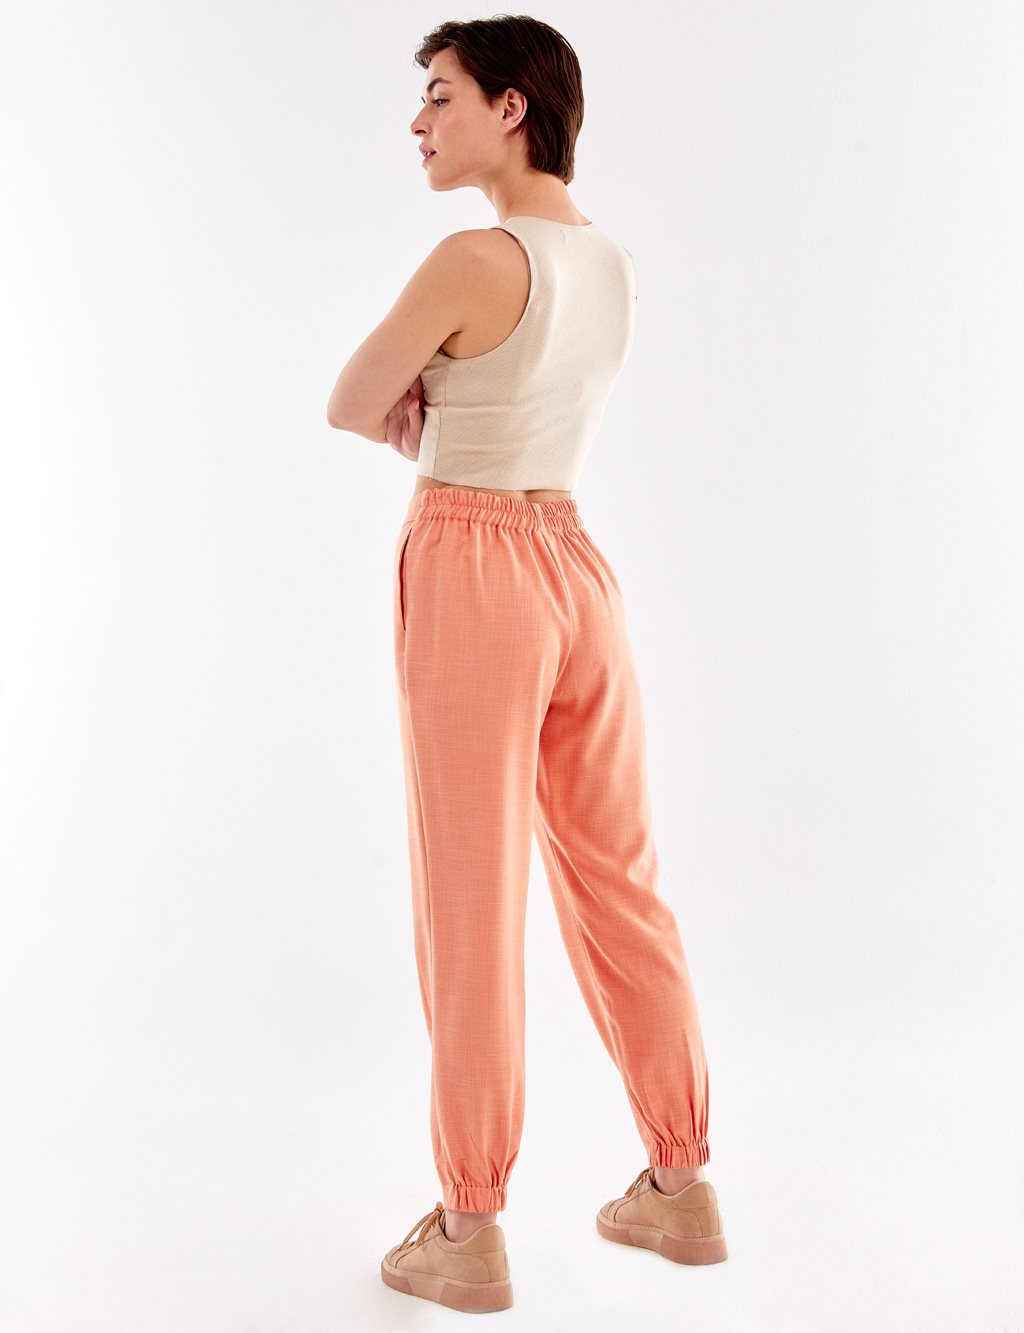 Gray Patterned Jogger Pants Peach